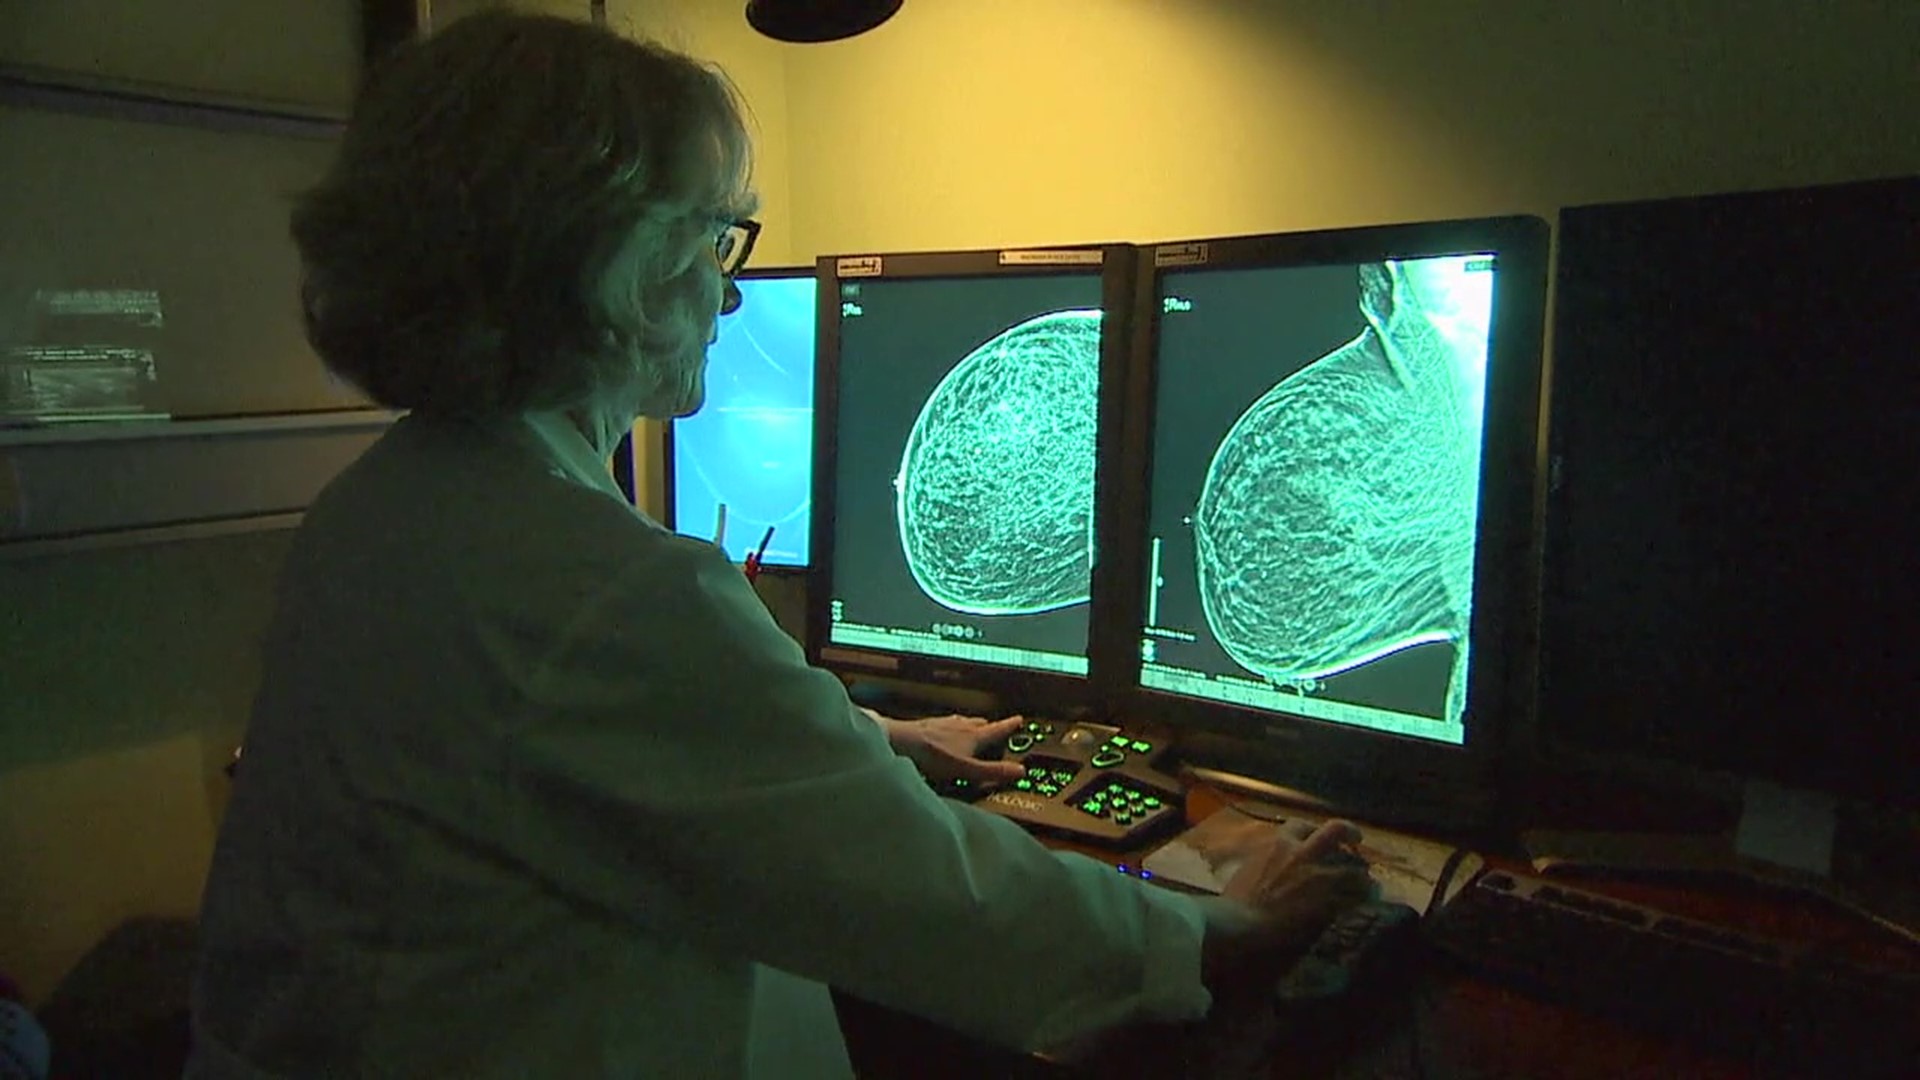 Doctors at Geisinger want people to know that early detection through mammograms can save lives.